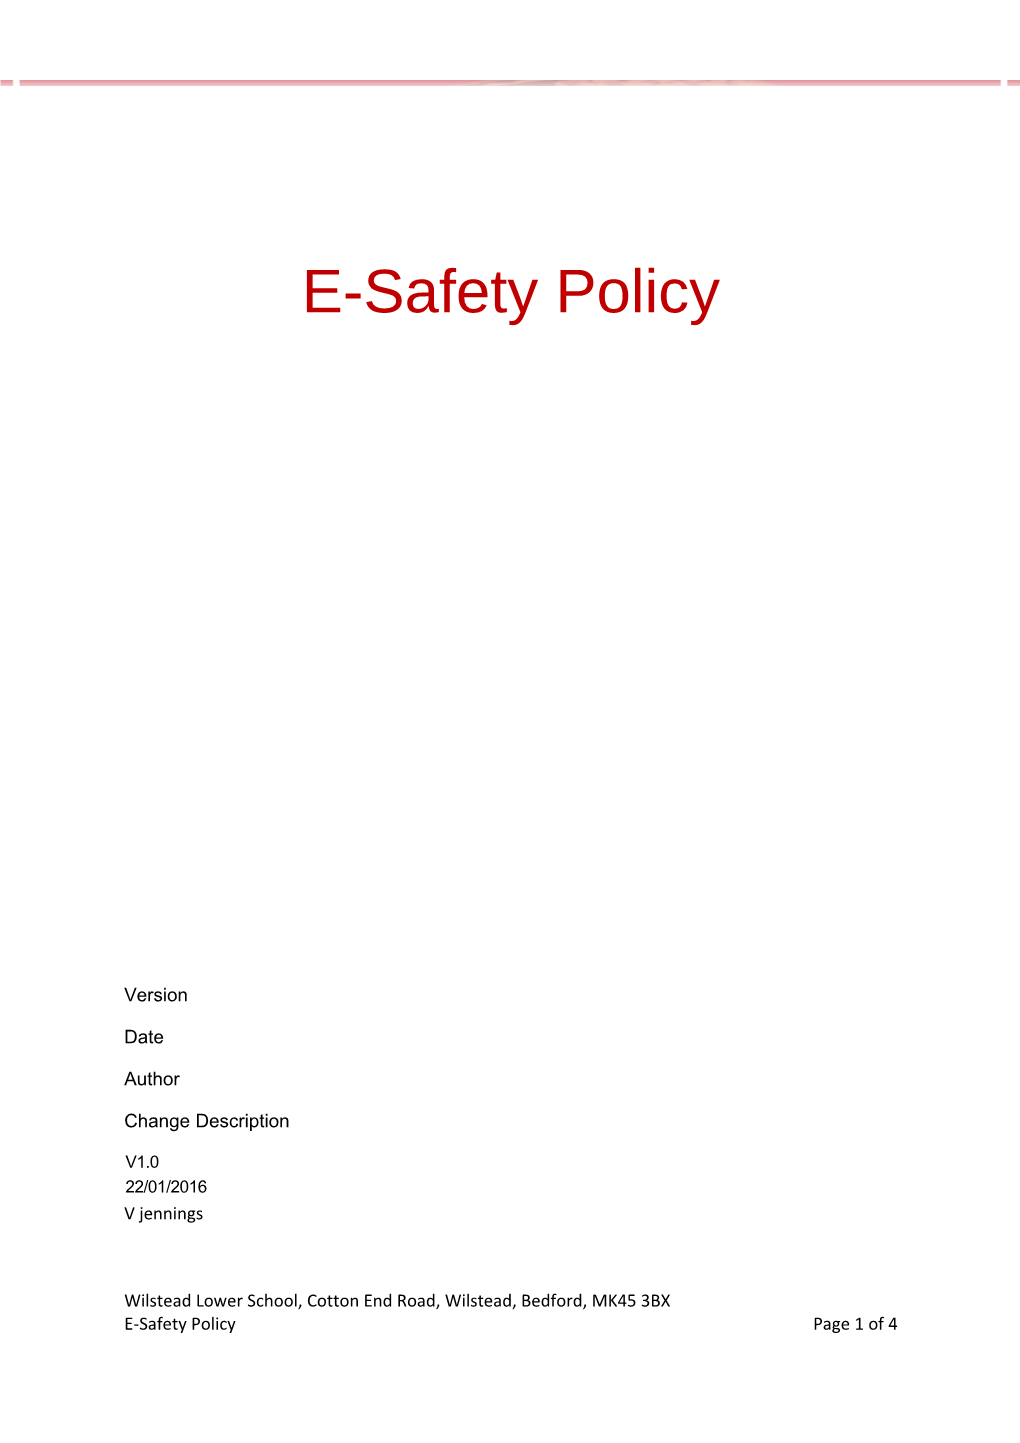 E-Safety Depends on Effective Practice at a Number of Levels